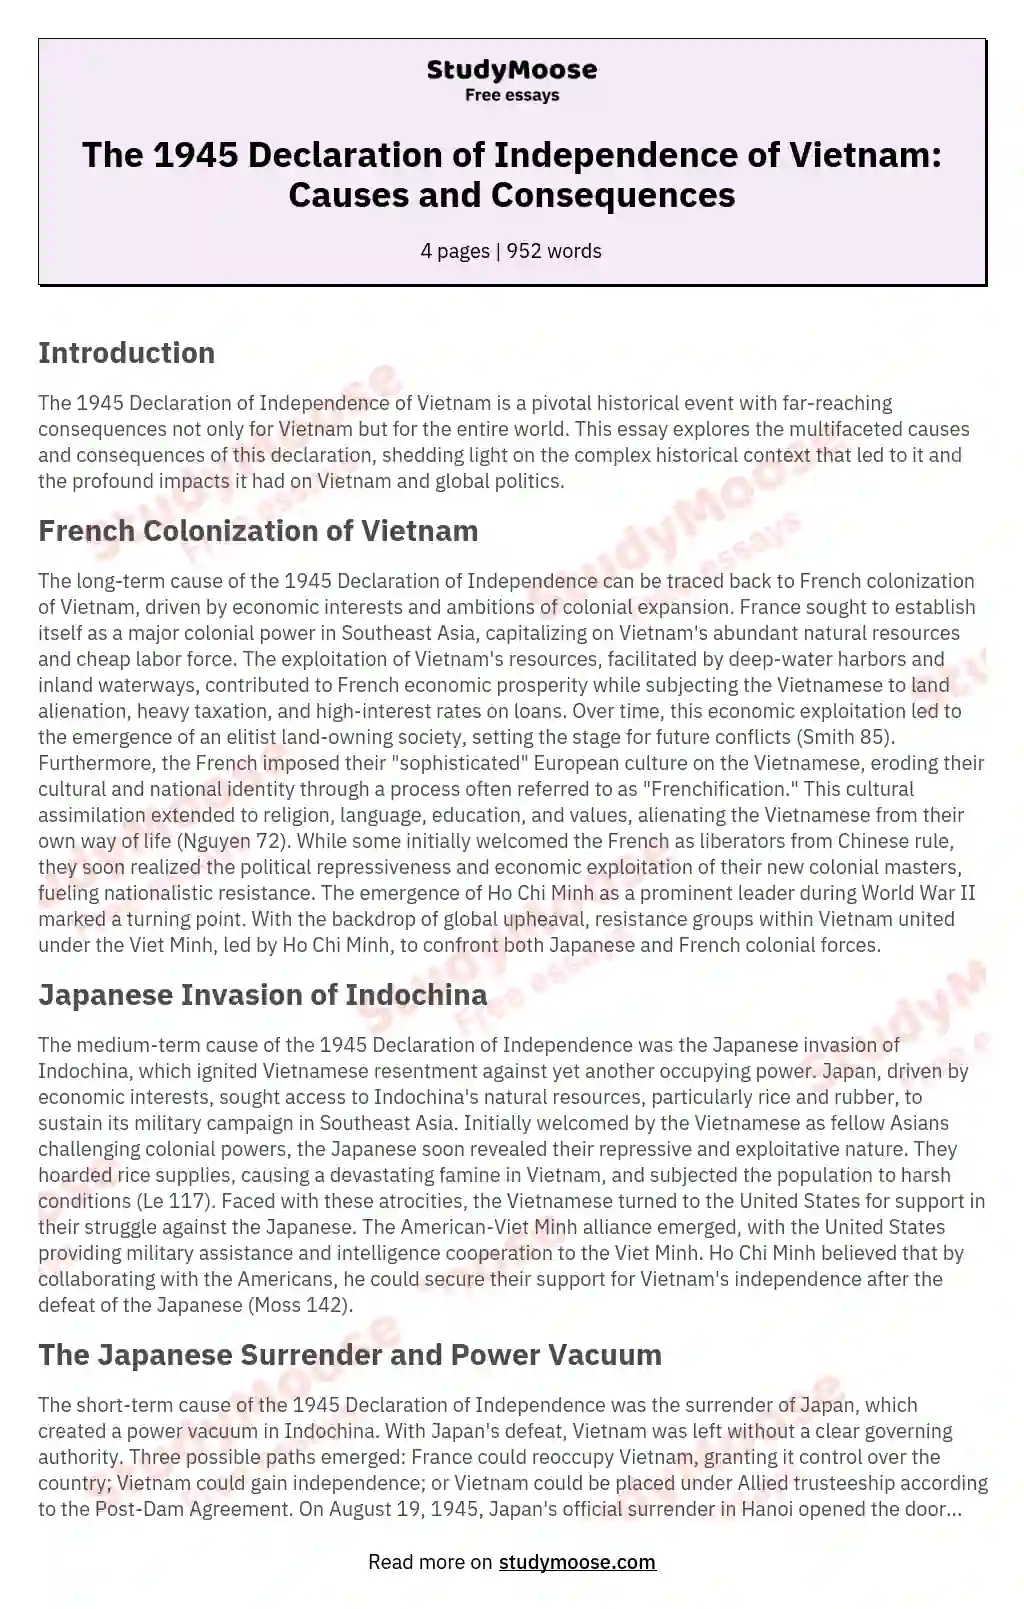 The Causes and Effects of the 1945 Vietnamese Declaration of Independence